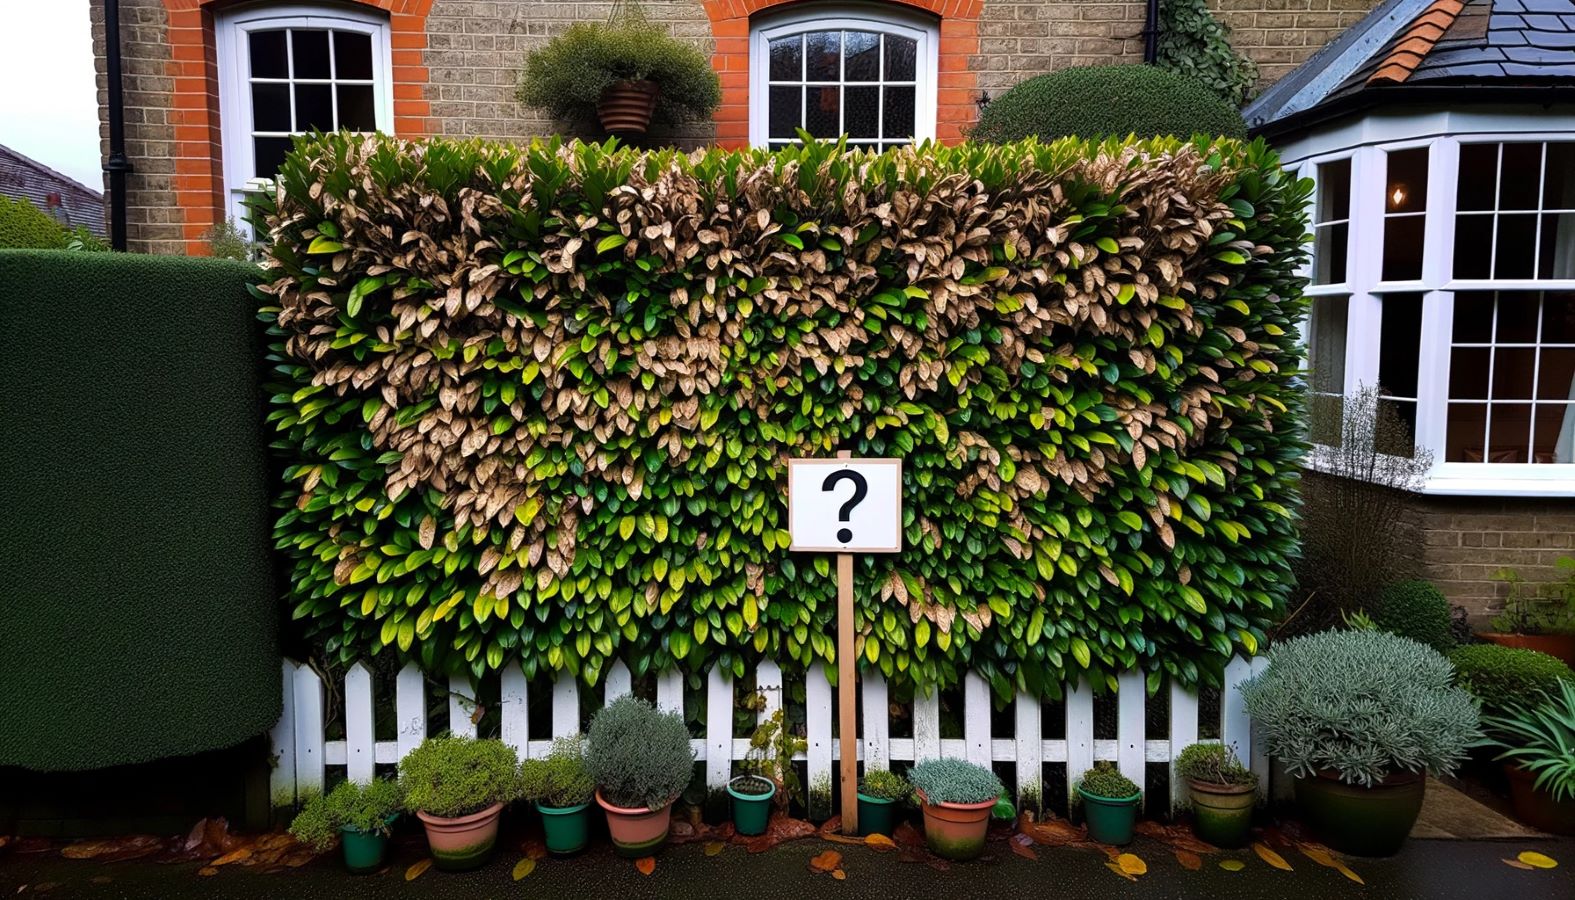 A hedge showing signs of distress in a contemporary British garden setting, with care tools and solutions nearby.